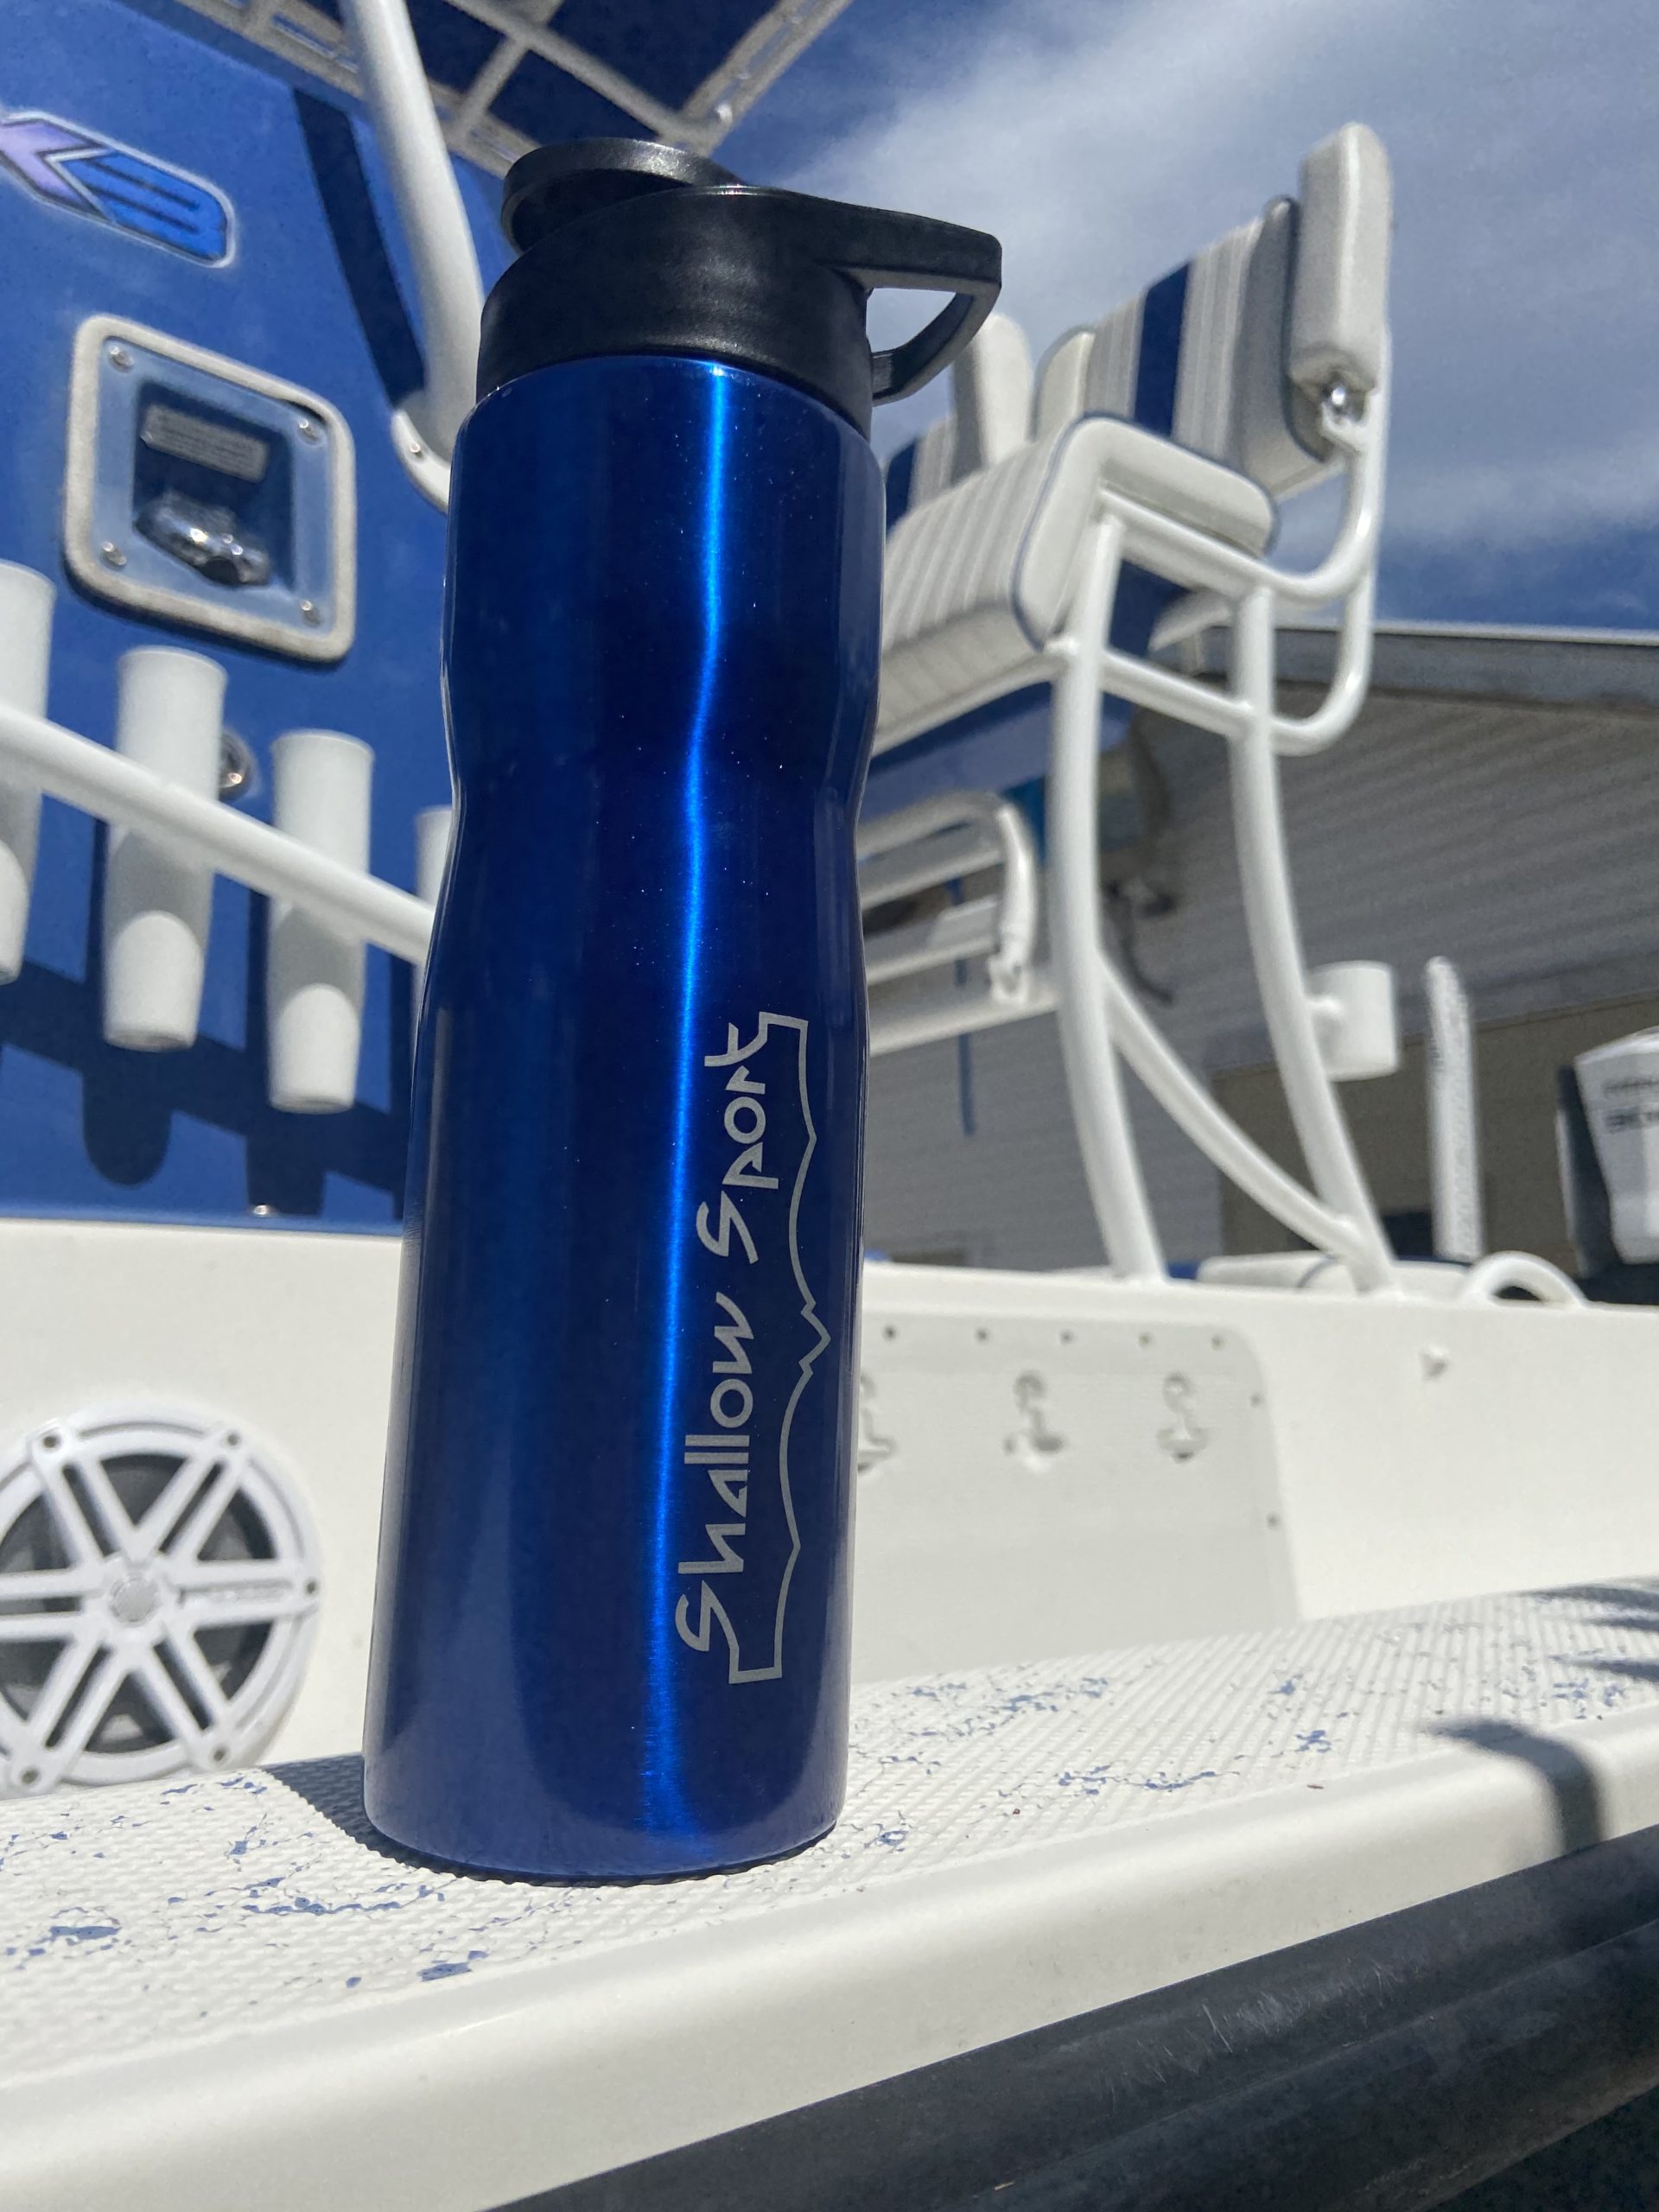 RTIC Cups & Water Bottles, Shallow Sport Boats